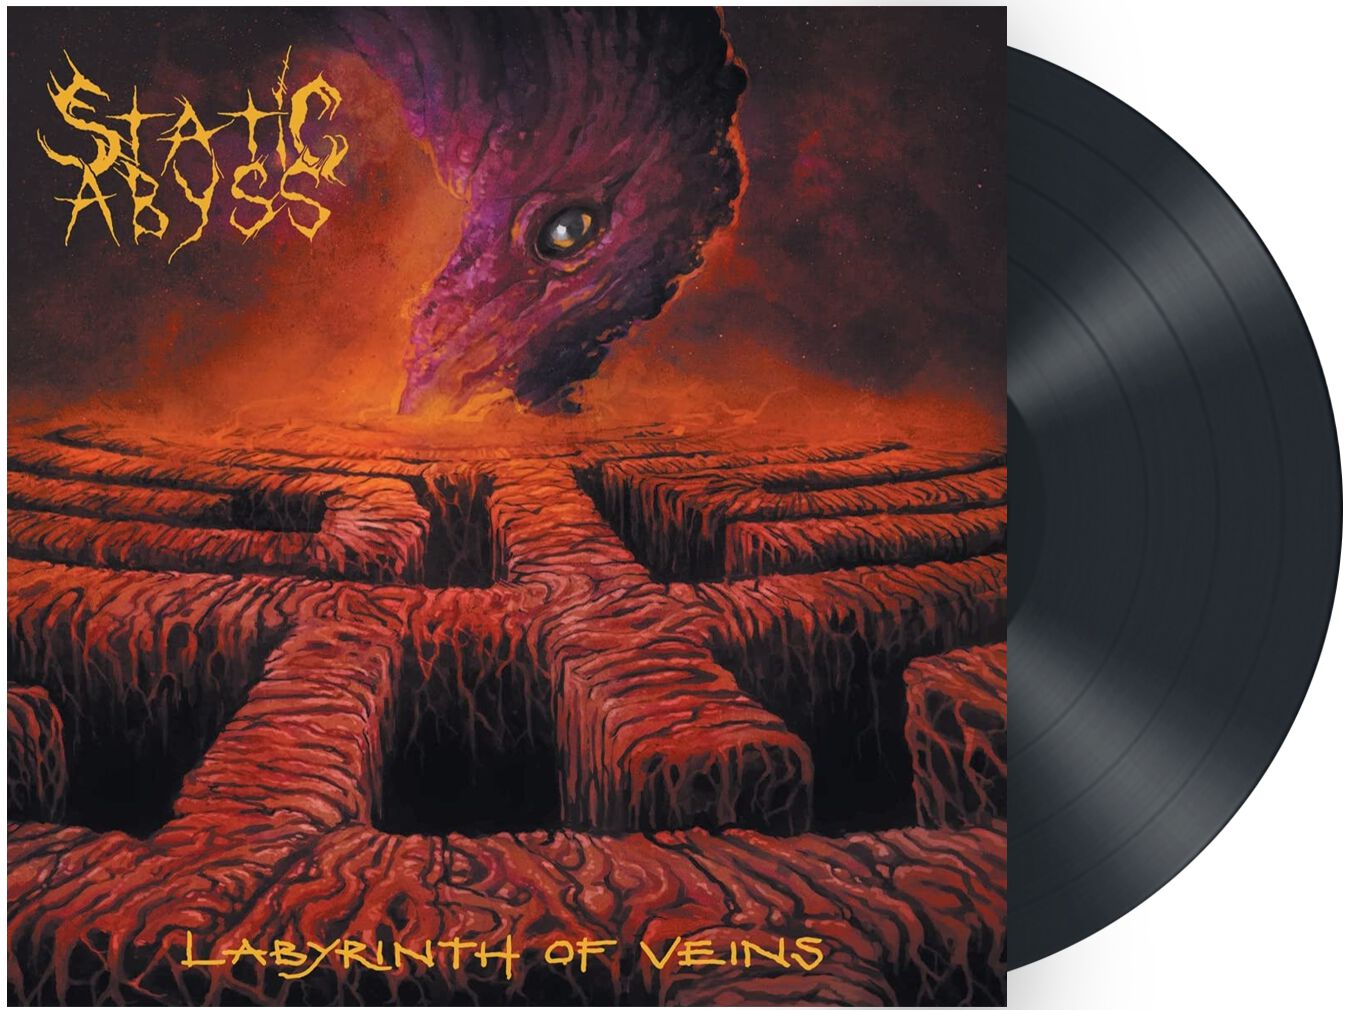 Image of Static Abyss Labyrinth of veins LP schwarz